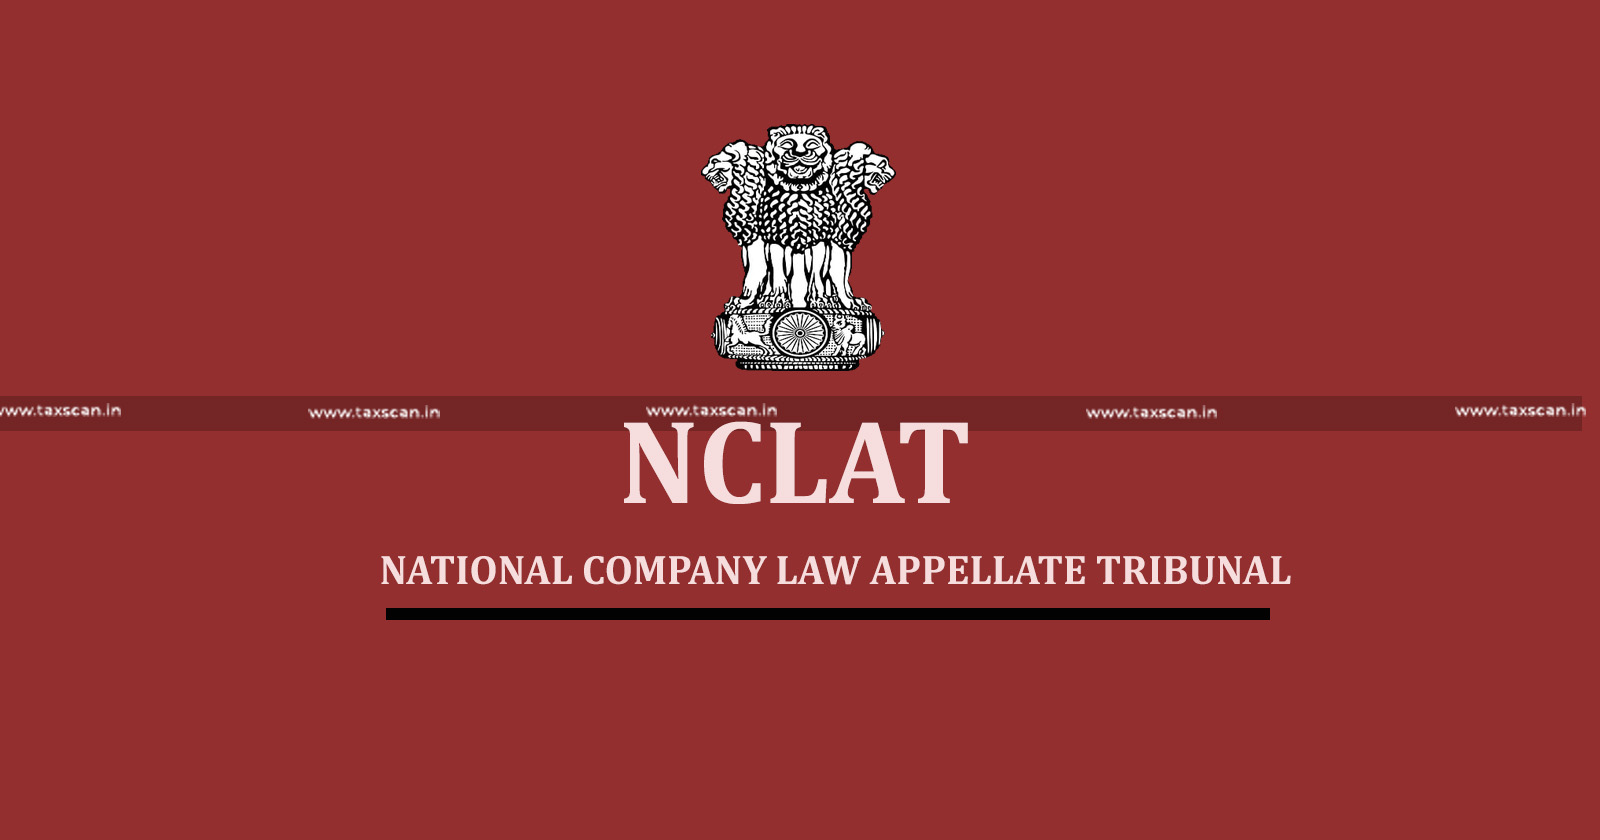 CIRP - NCLAT - NCLT - Fresh Form G - Insolvency proceedings - NCLT Resolution Plan submission - taxscan